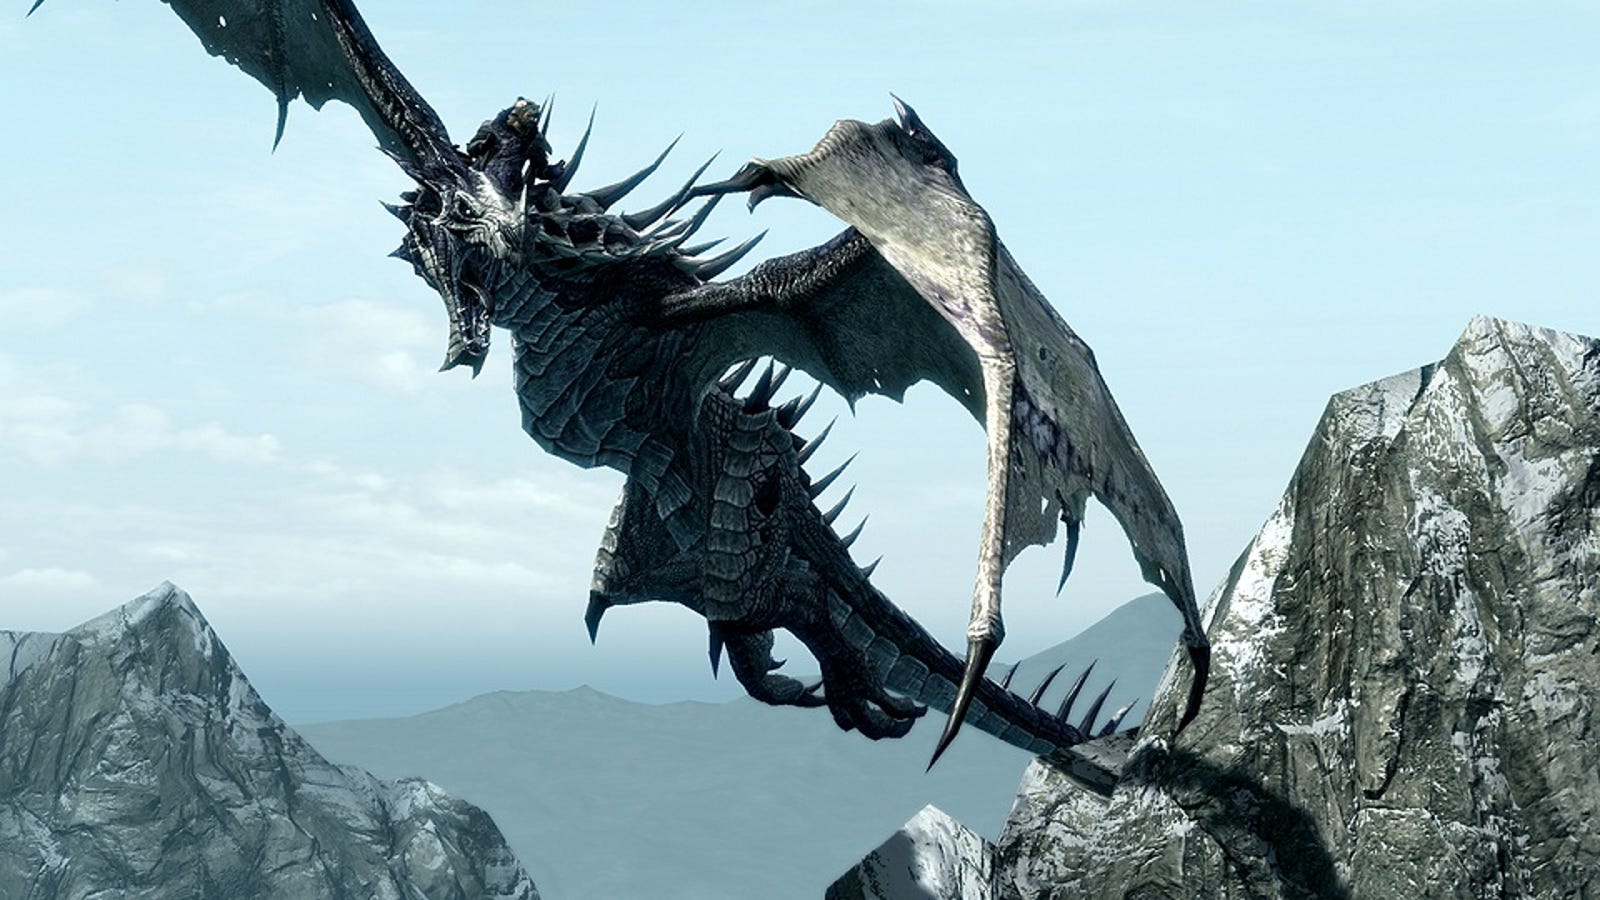 dragonborn-is-the-first-skyrim-dlc-that-actually-feels-like-an-expansion